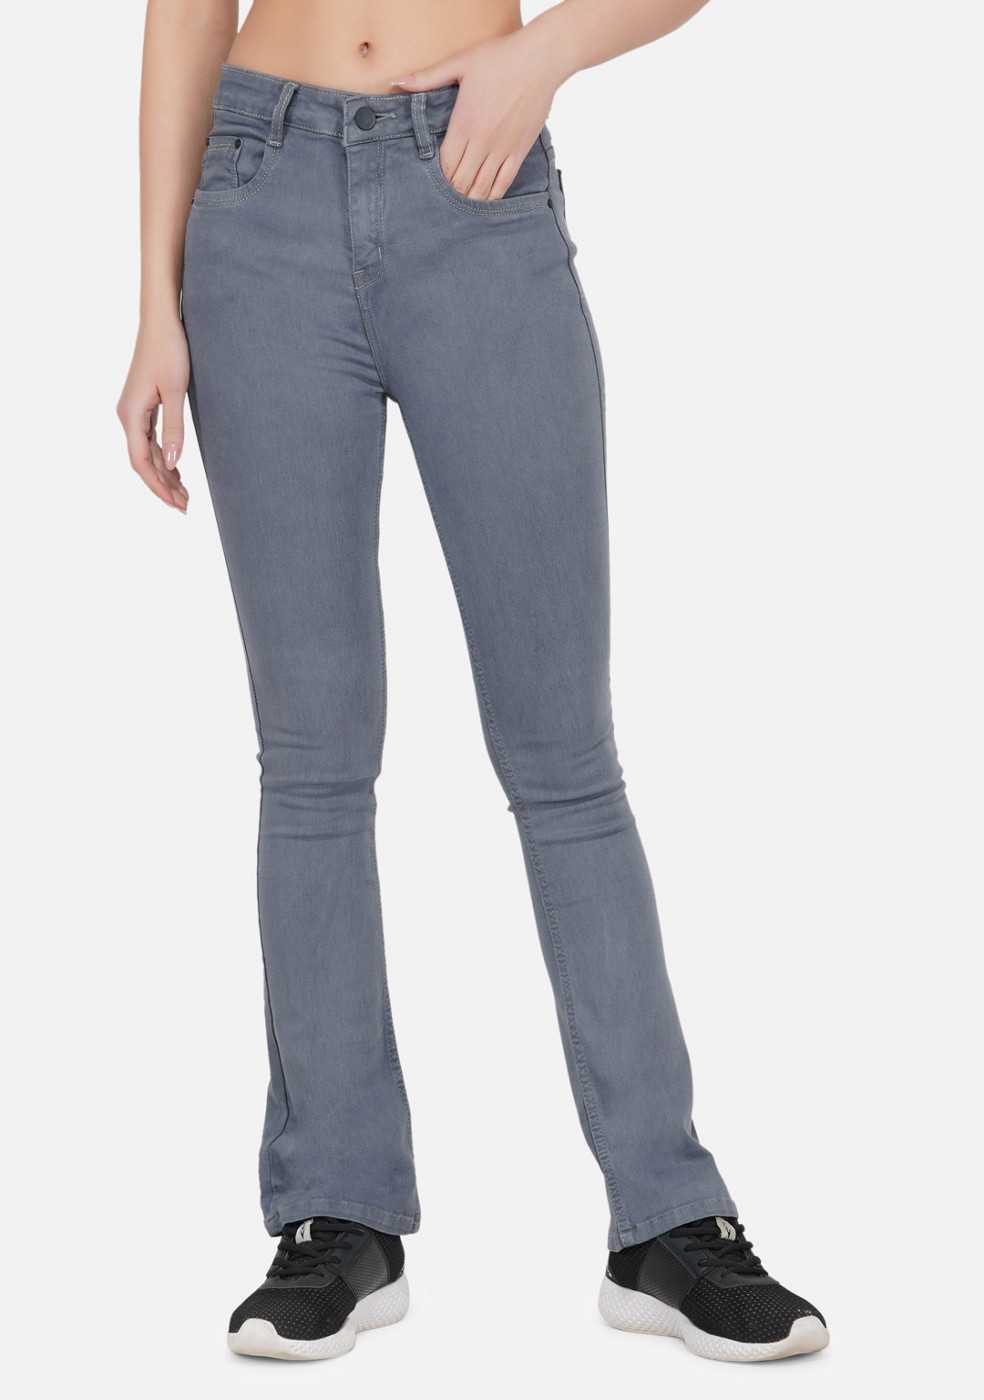 Stretchable Cotton Gray Color Jeans For Women